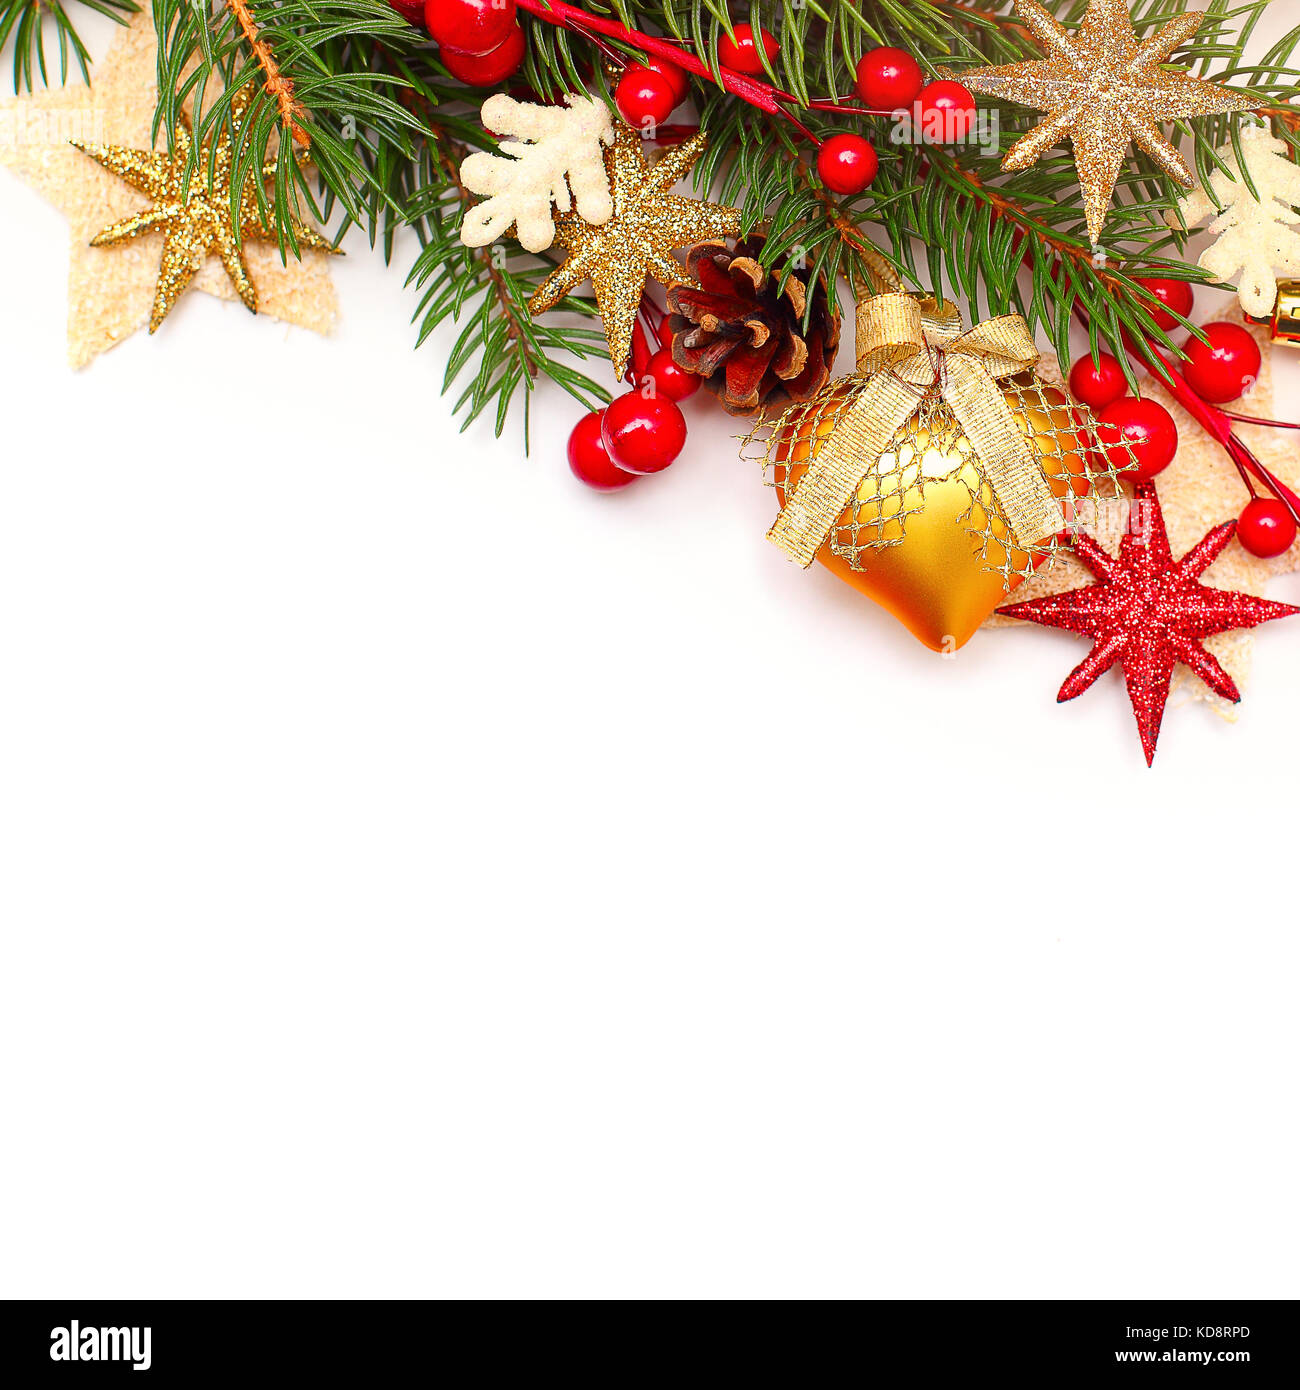 Christmas Background with Xmas Tree Twig and Decorations. Abstract Christmas or New Year Border for Xmas Card Stock Photo